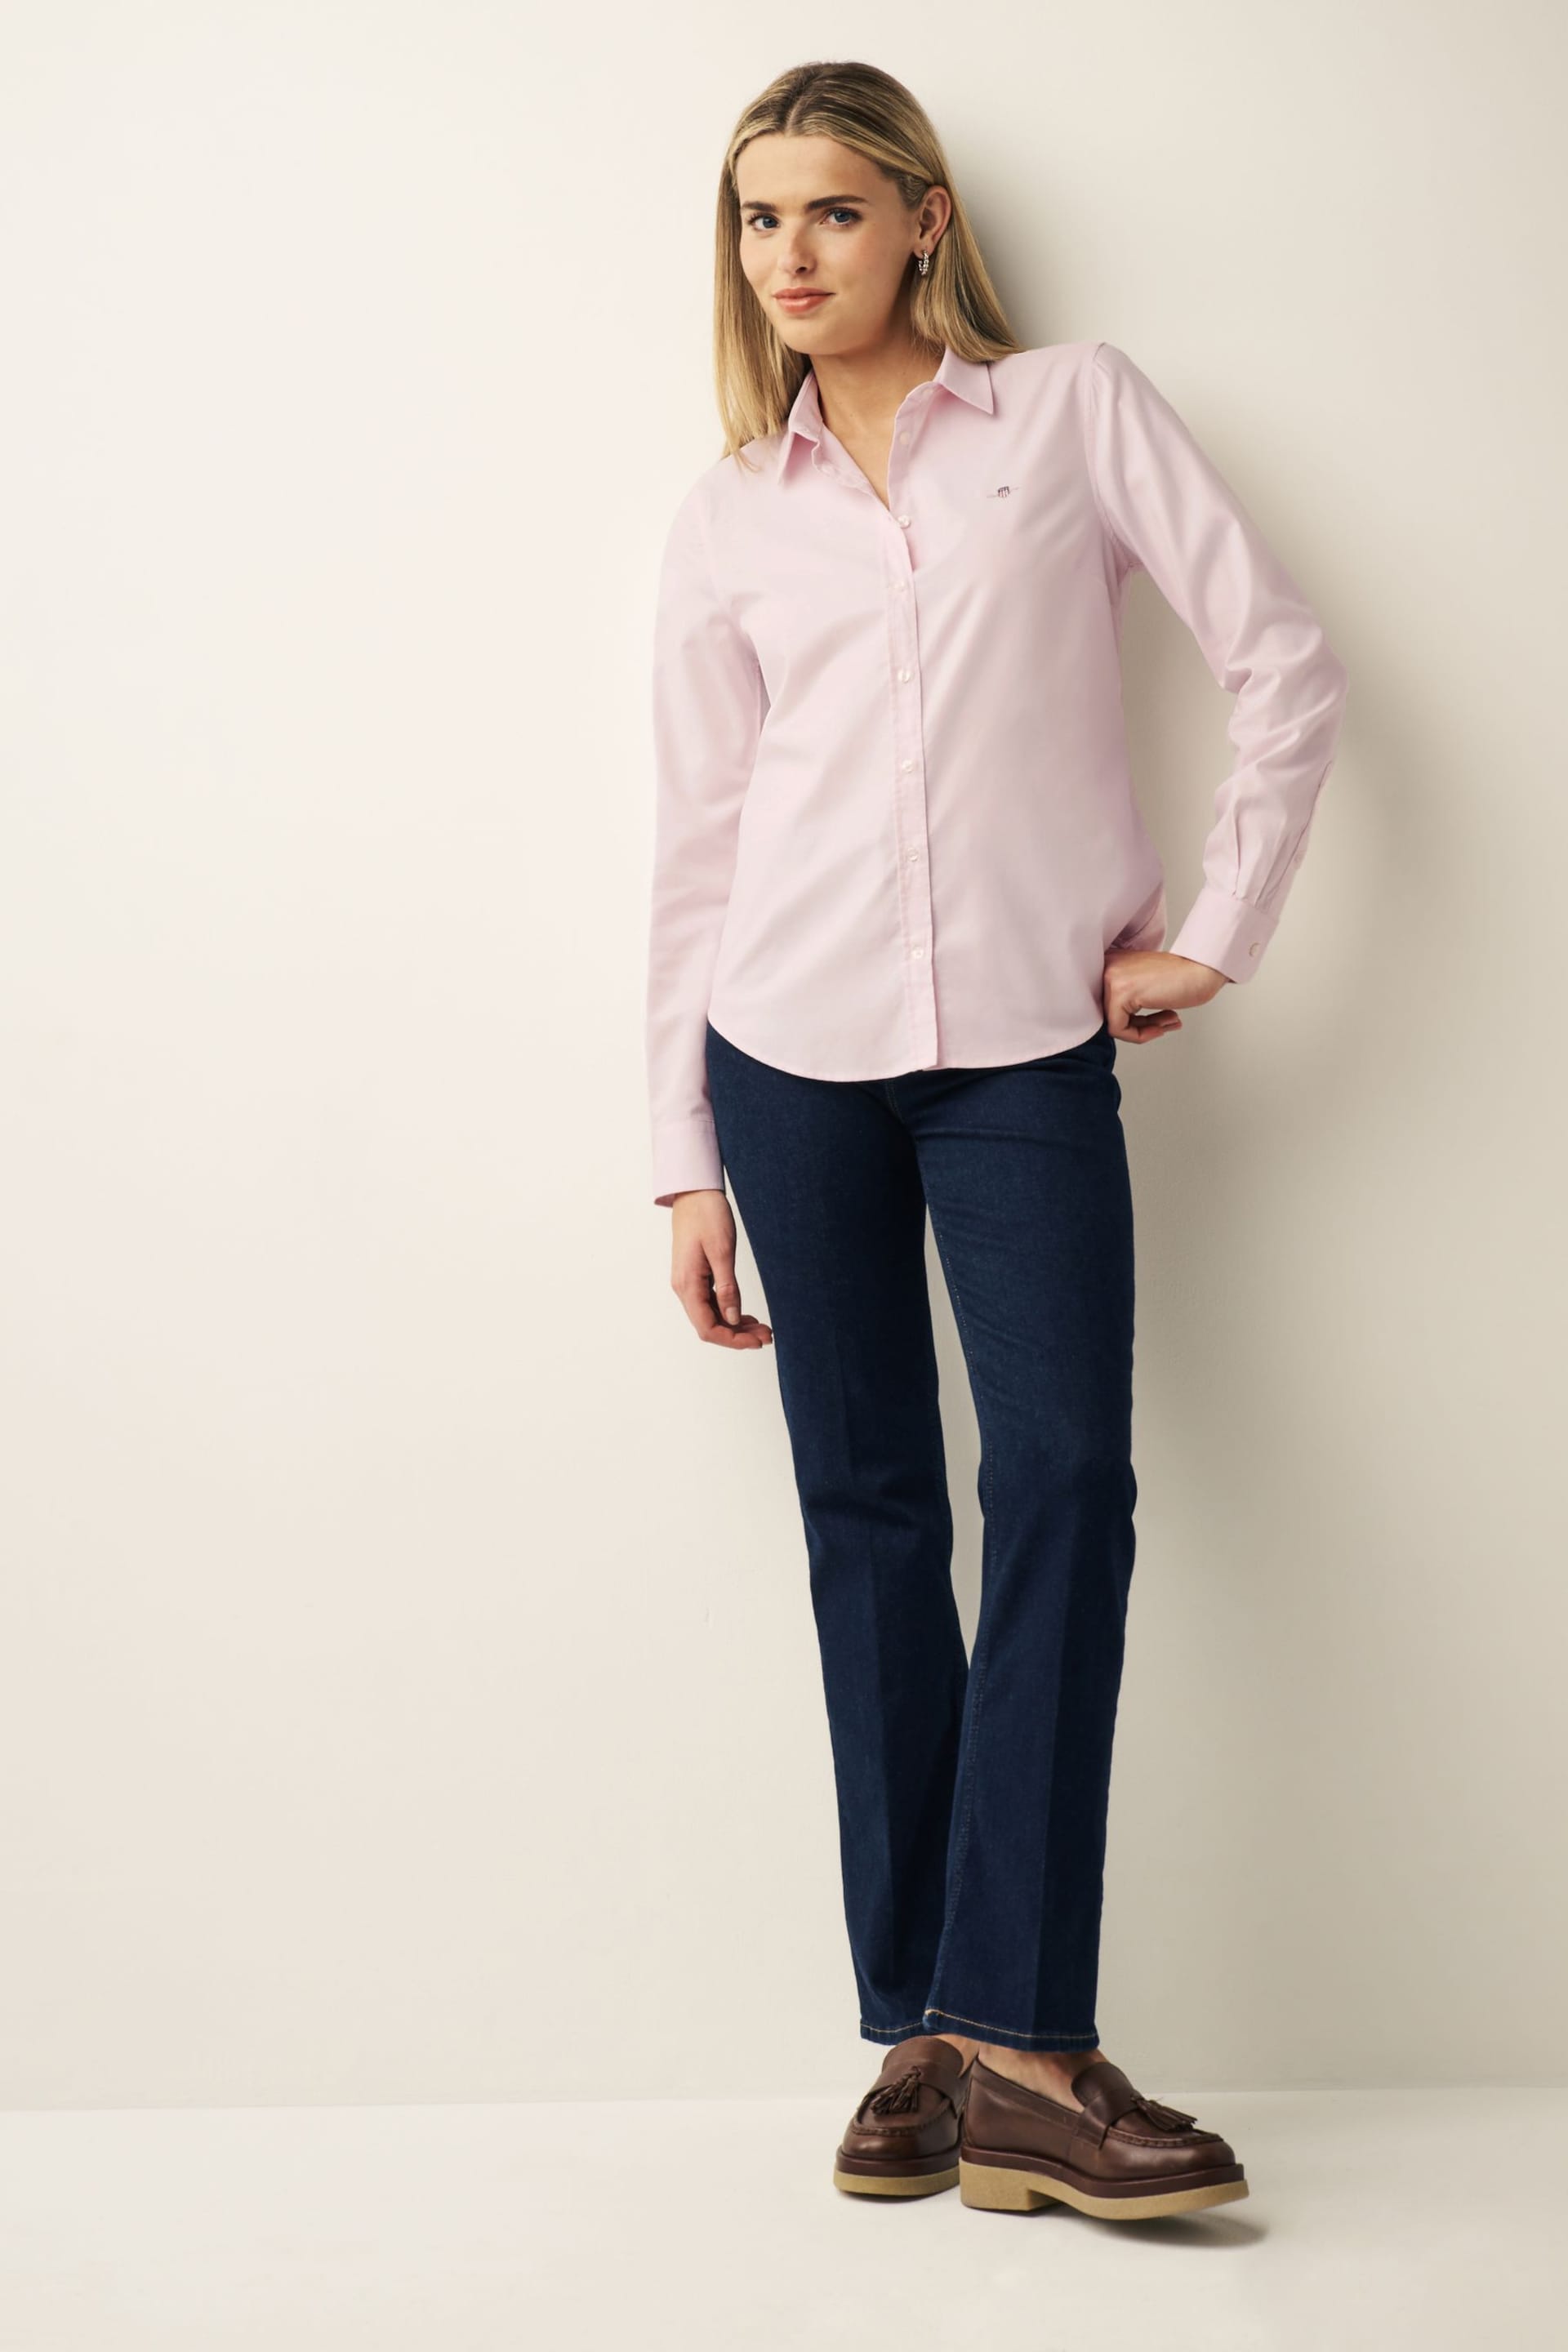 GANT Pink Fitted Stretch Oxford Shirt - Image 2 of 6